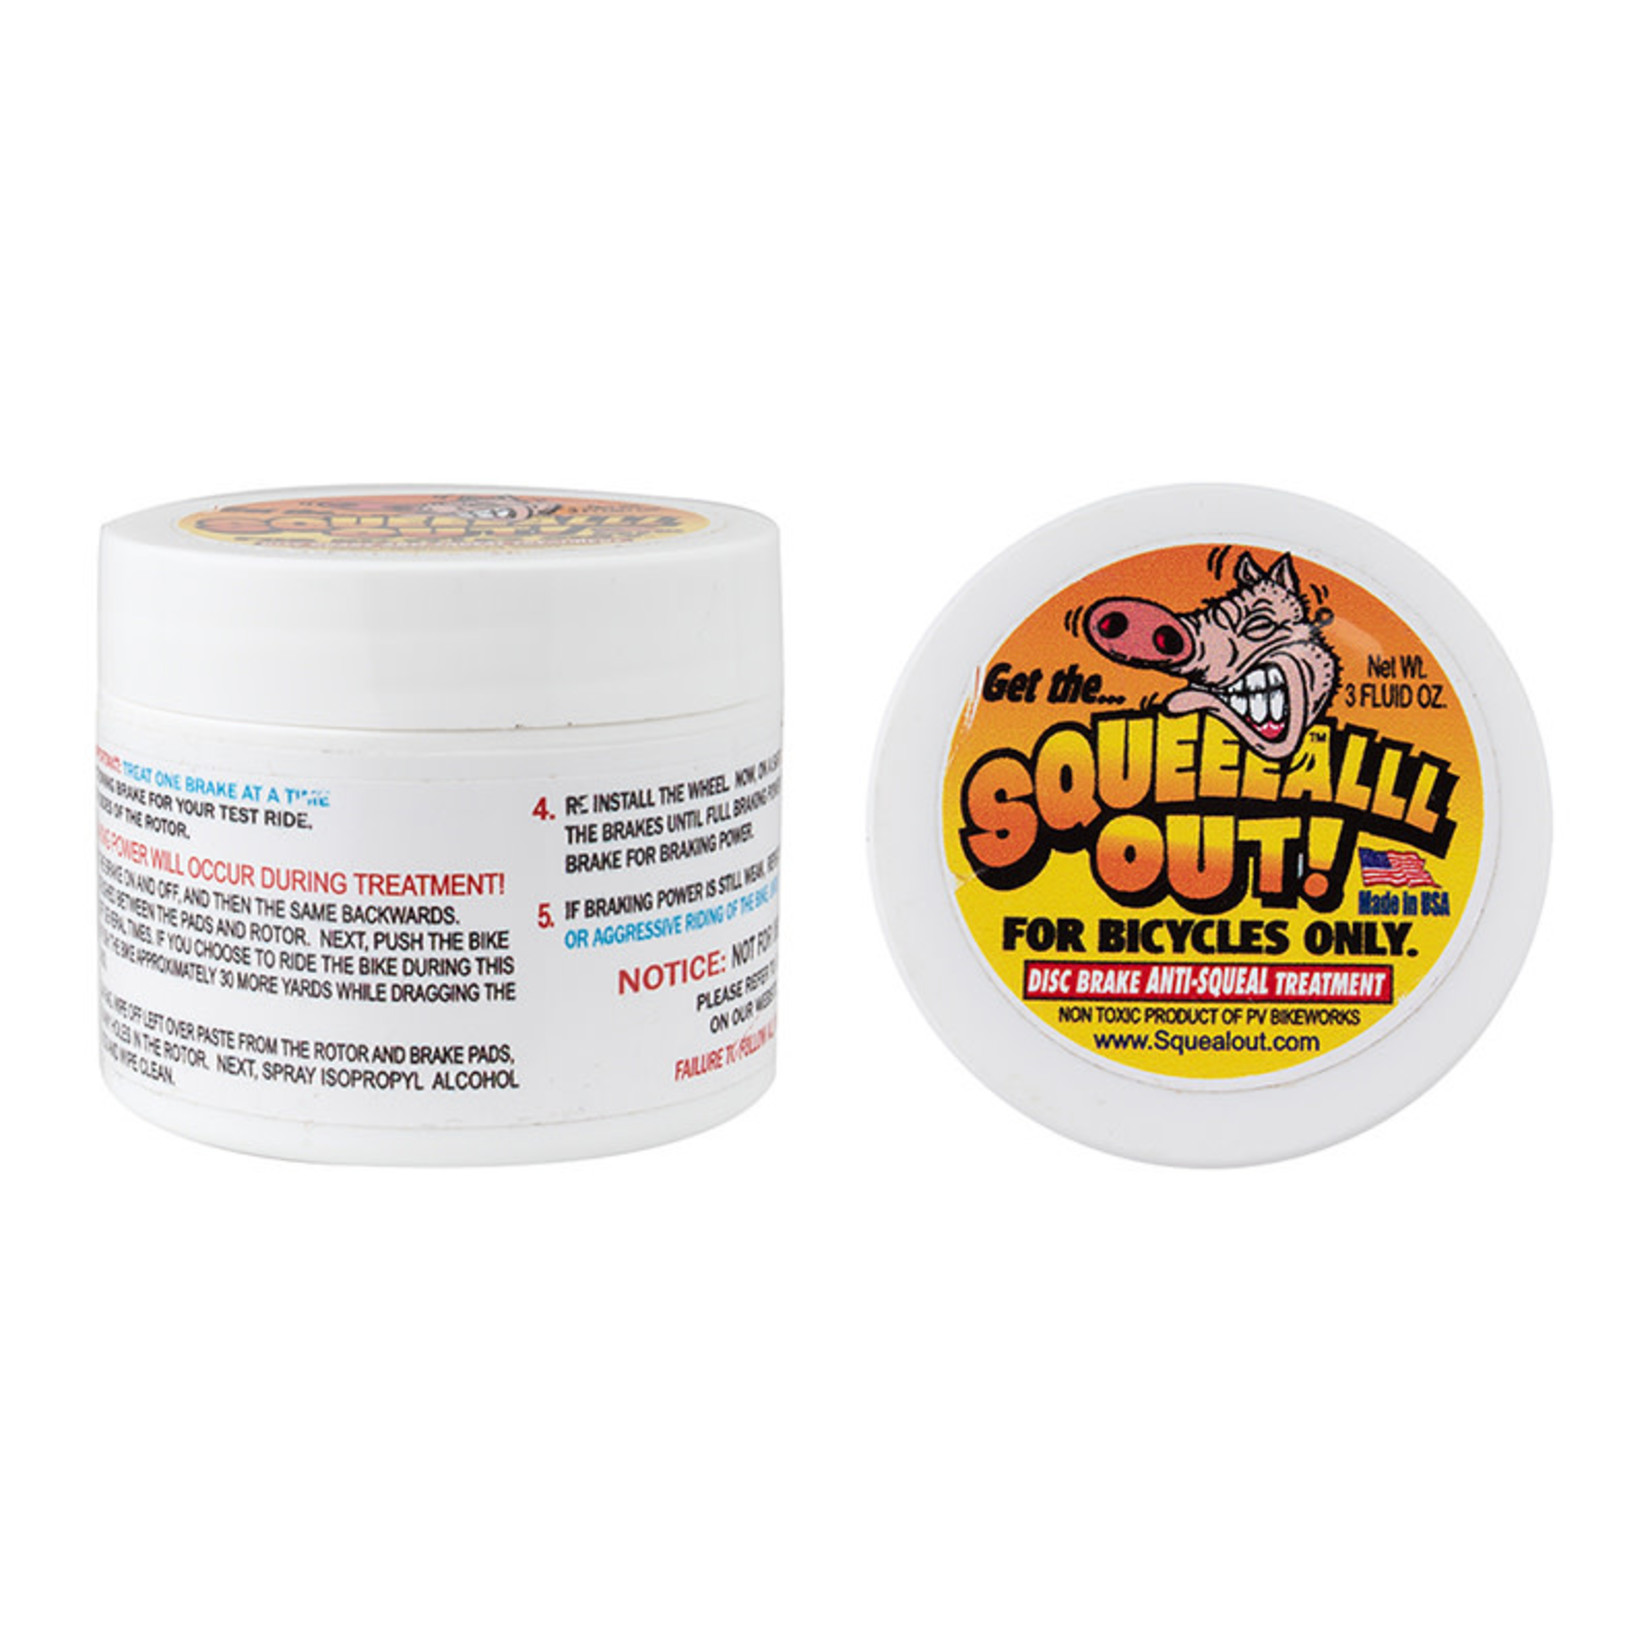 CLEANER Squeal Out Anti-Squeal Disc Brake Paste: 3oz Jar